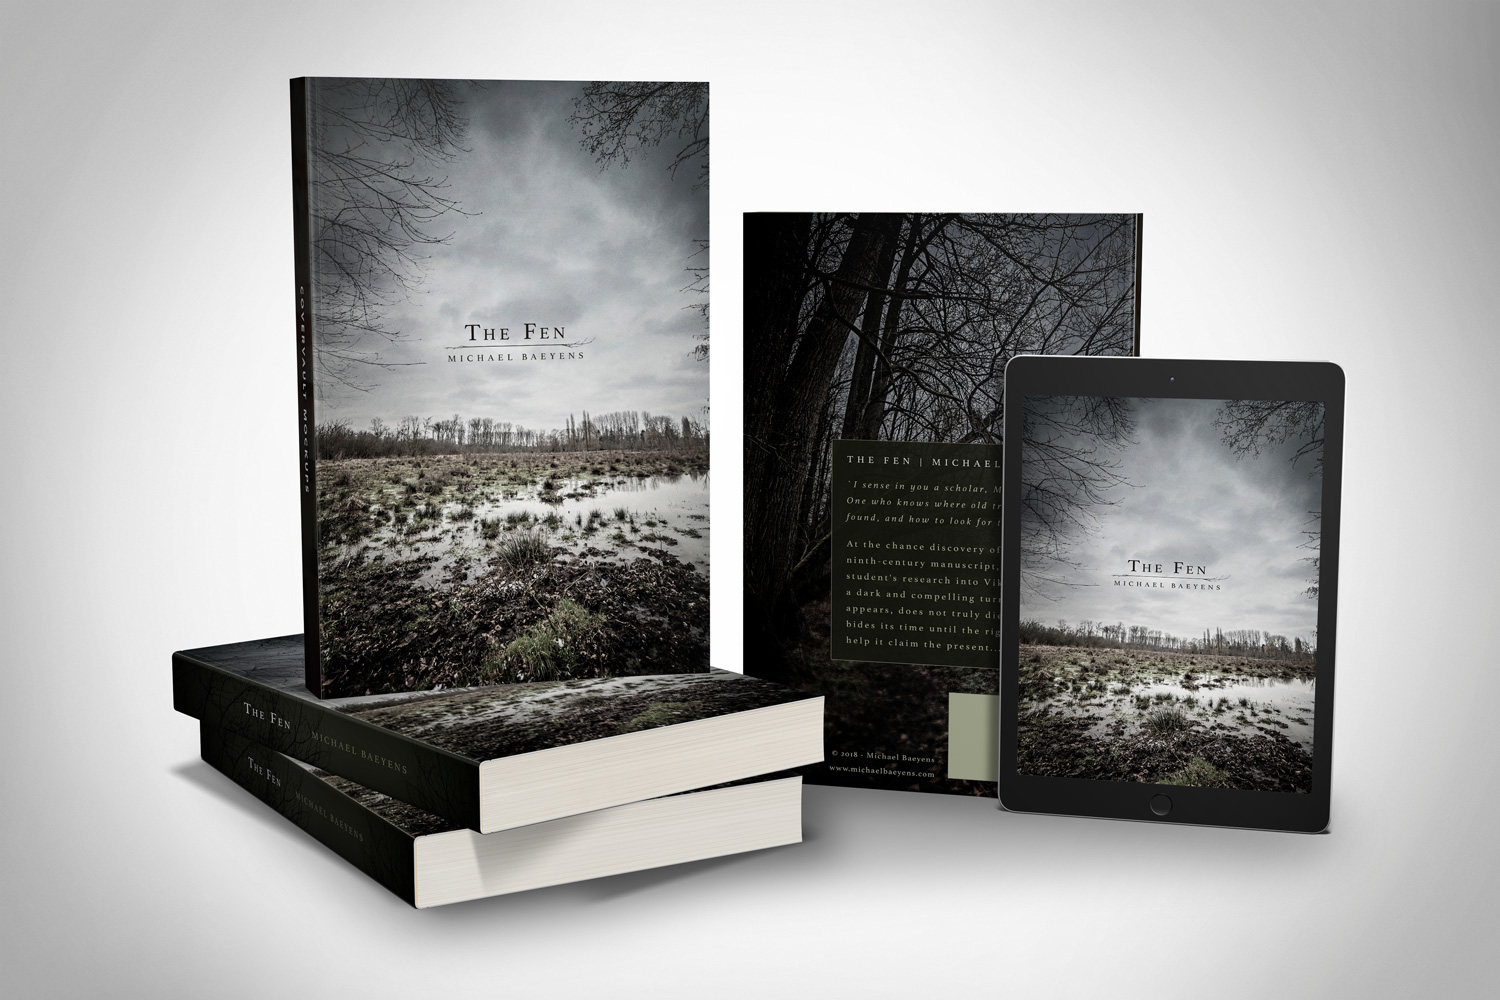 Greyclouds.be - Bert Blondeel | Design for print: photo and bookcover design - 'The Fen' by Michael Baeyens